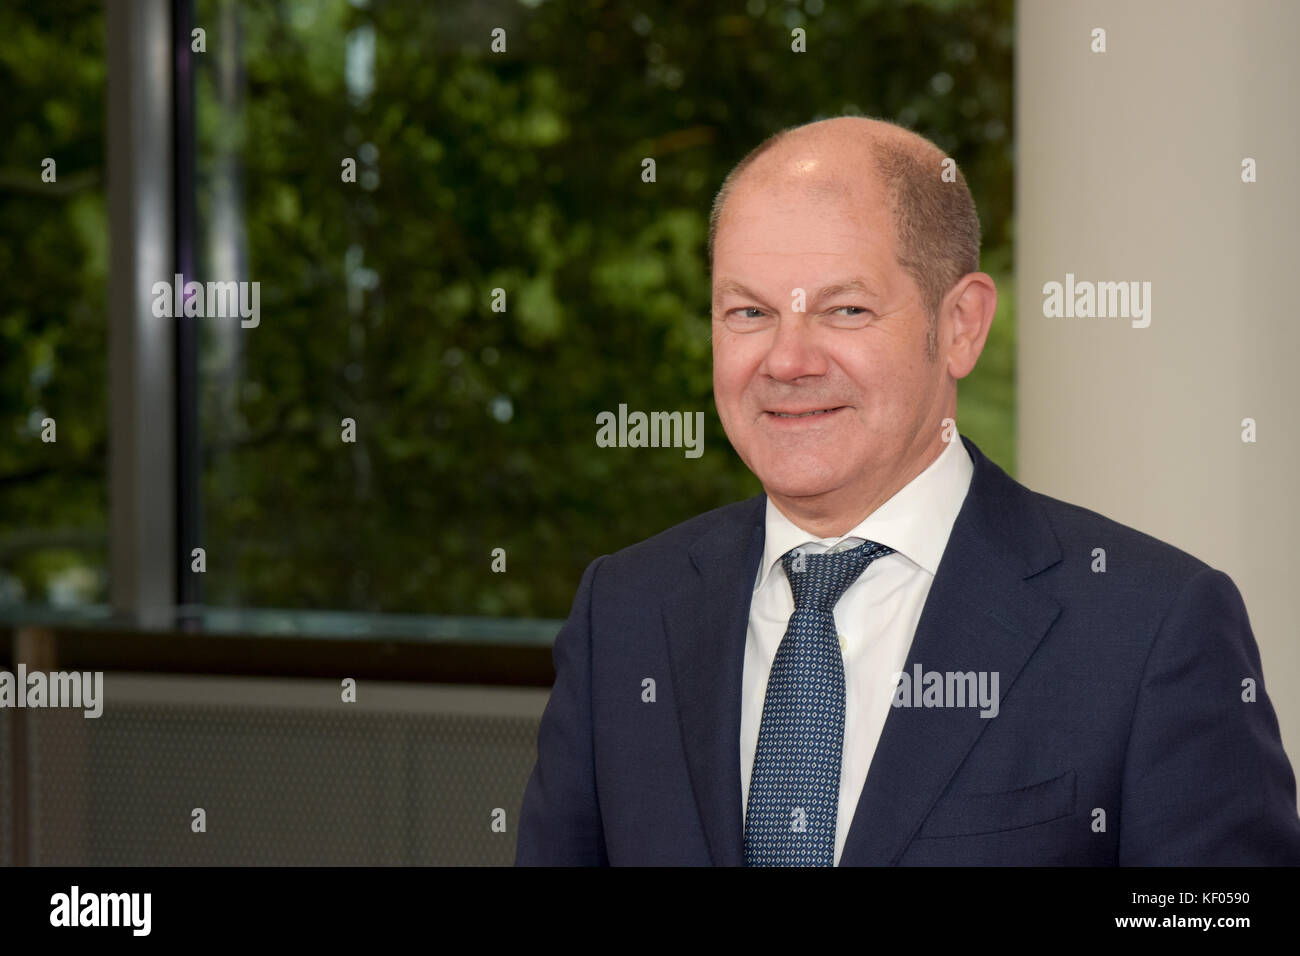 Frankfurt, Germany. 10th Oct, 2017. Olaf Scholz (* June 6th 1974), german politician and mayor of Hamburg, arriving on the red carpet for the Frankfur Stock Photo